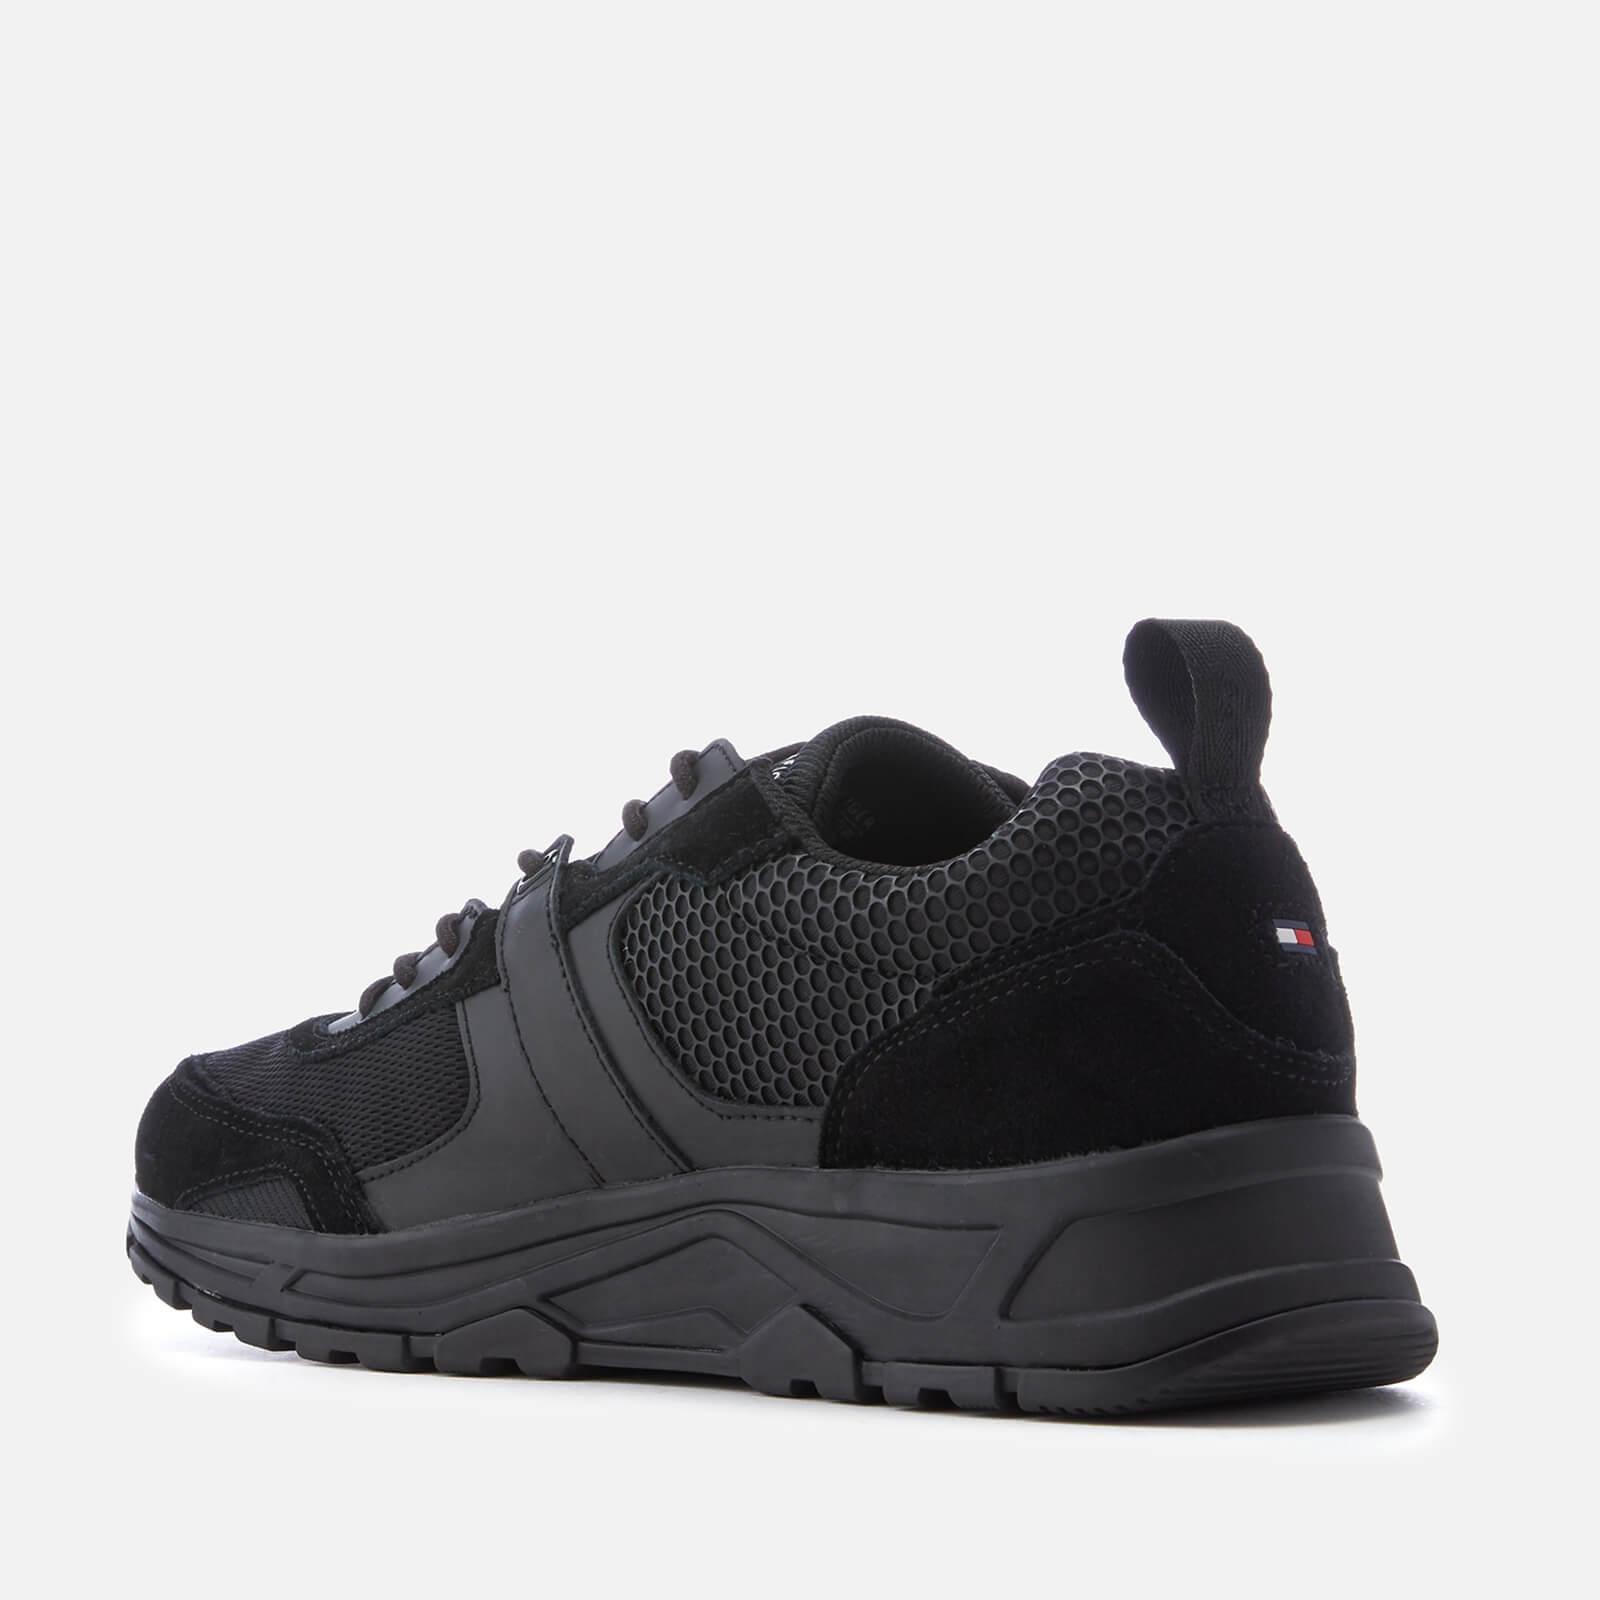 tommy hilfiger material mix lightweight logo trainer in black